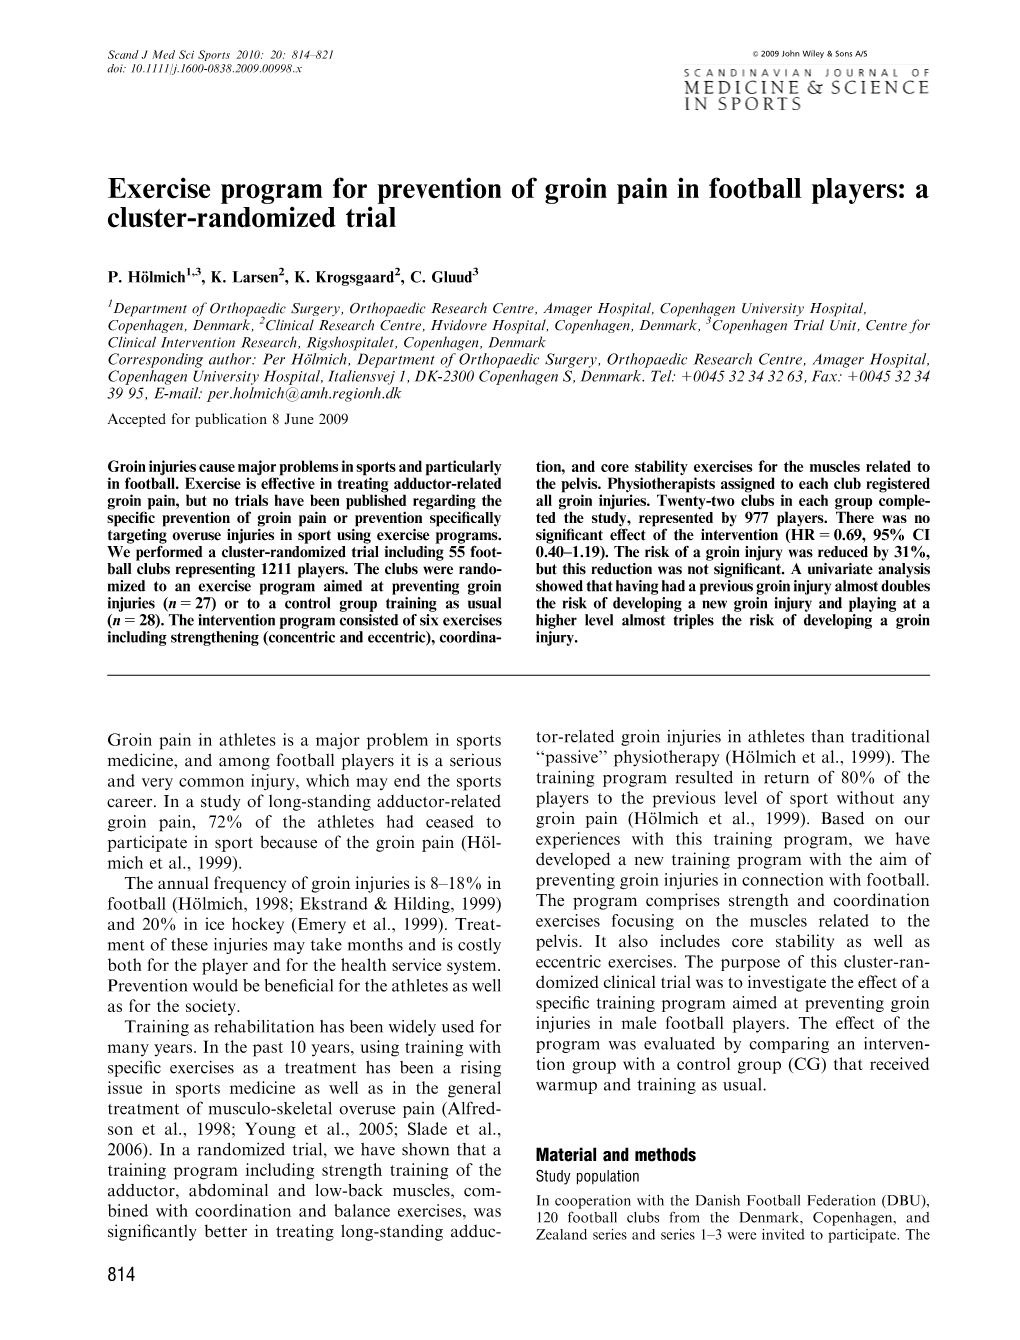 Exercise Program for Prevention of Groin Pain in Football Players: a Cluster-Randomized Trial